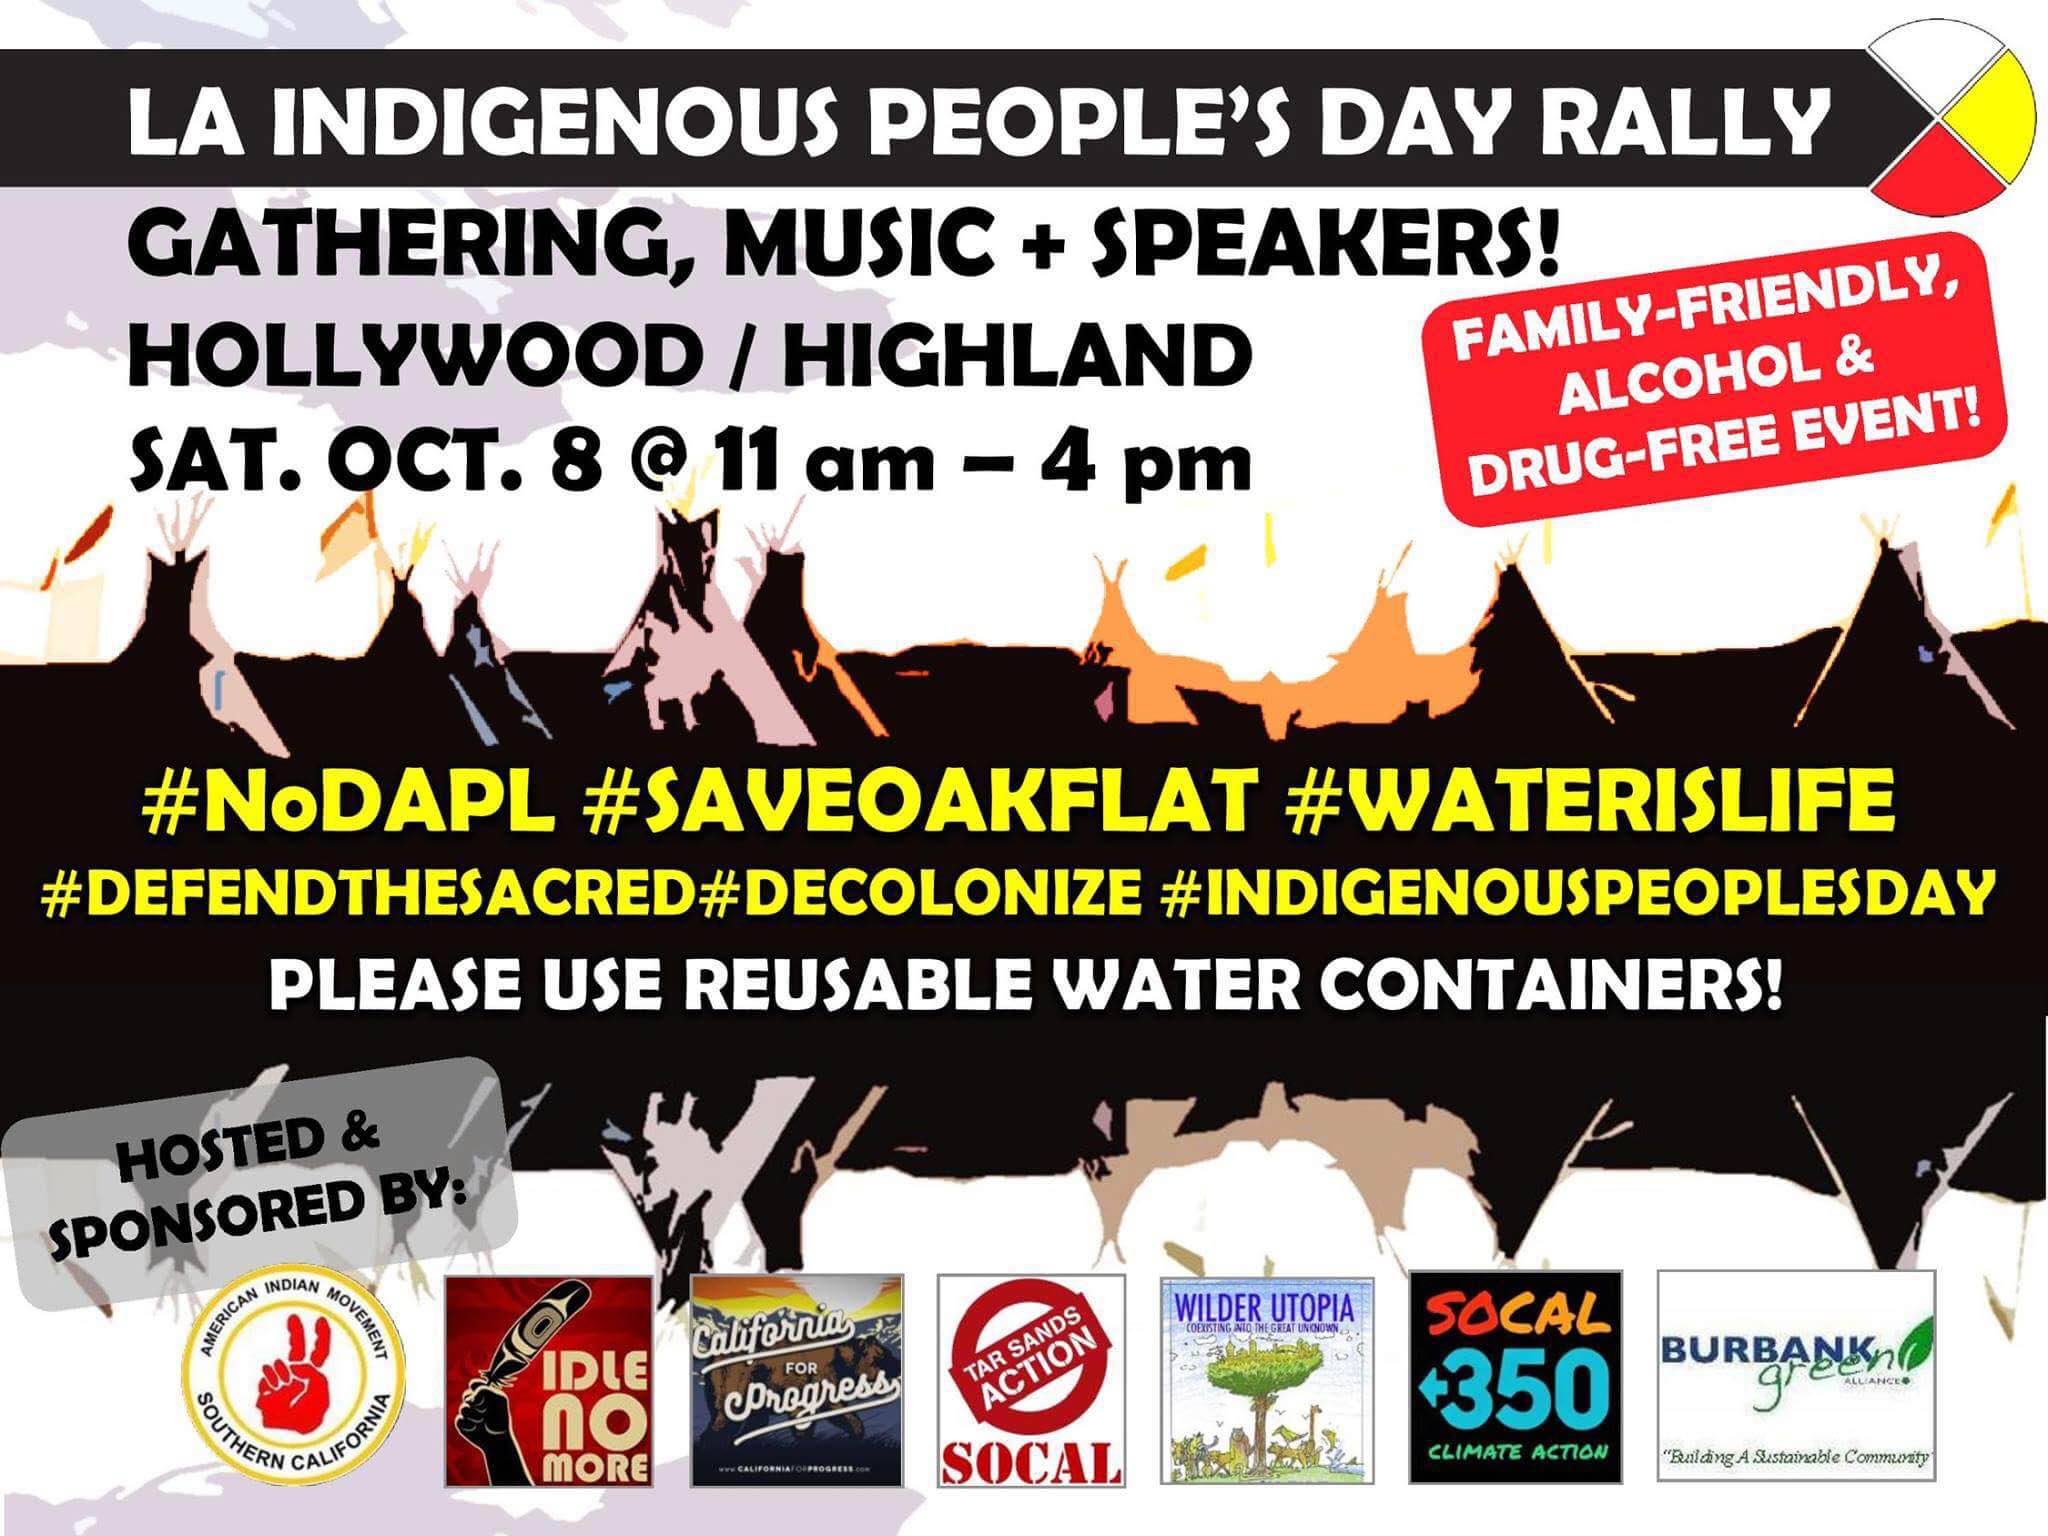 LA Indigenous Peoples Day Rally - October 8